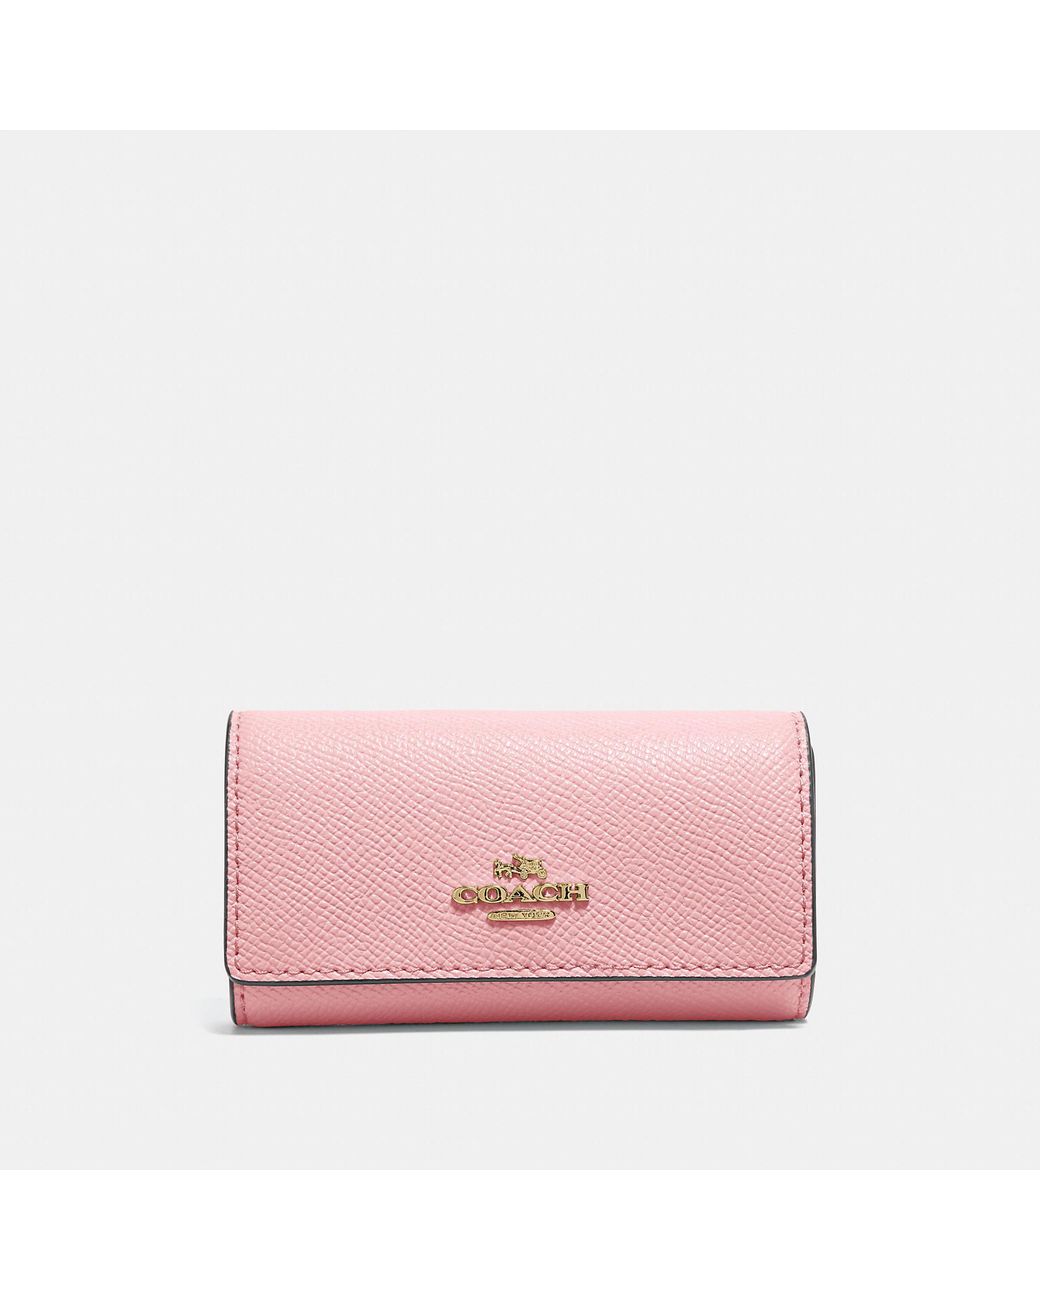 coach 5 key ring case > Purchase - 61%